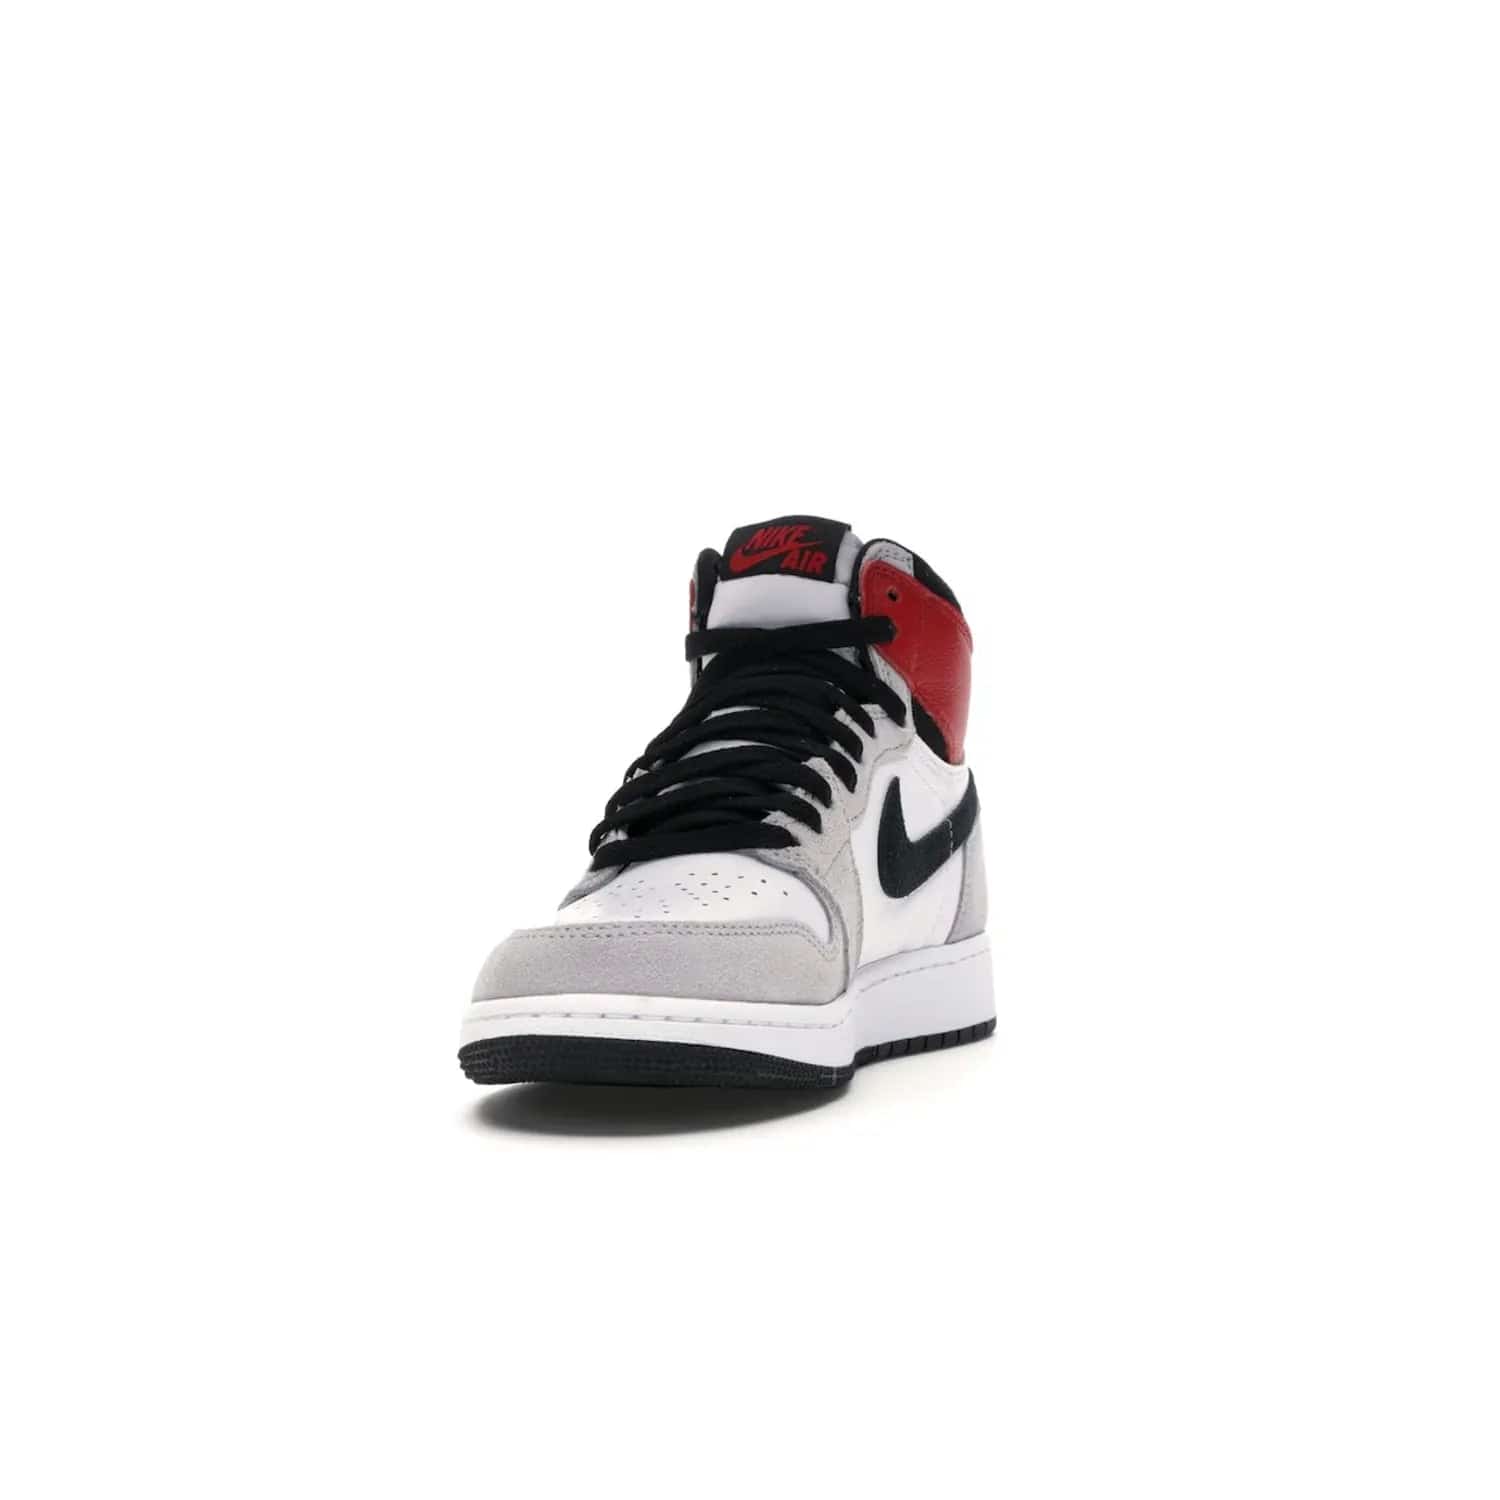 Jordan 1 Retro High Light Smoke Grey (GS) - Image 12 - Only at www.BallersClubKickz.com - Jordan 1 Retro High Light Smoke Grey (GS) features shades of grey, black, and Varsity Red with a bold silhouette. Premium white leather and suede overlays create a unique look. Released July 2020, offering style and performance. Perfect sneaker for any collector or fan.